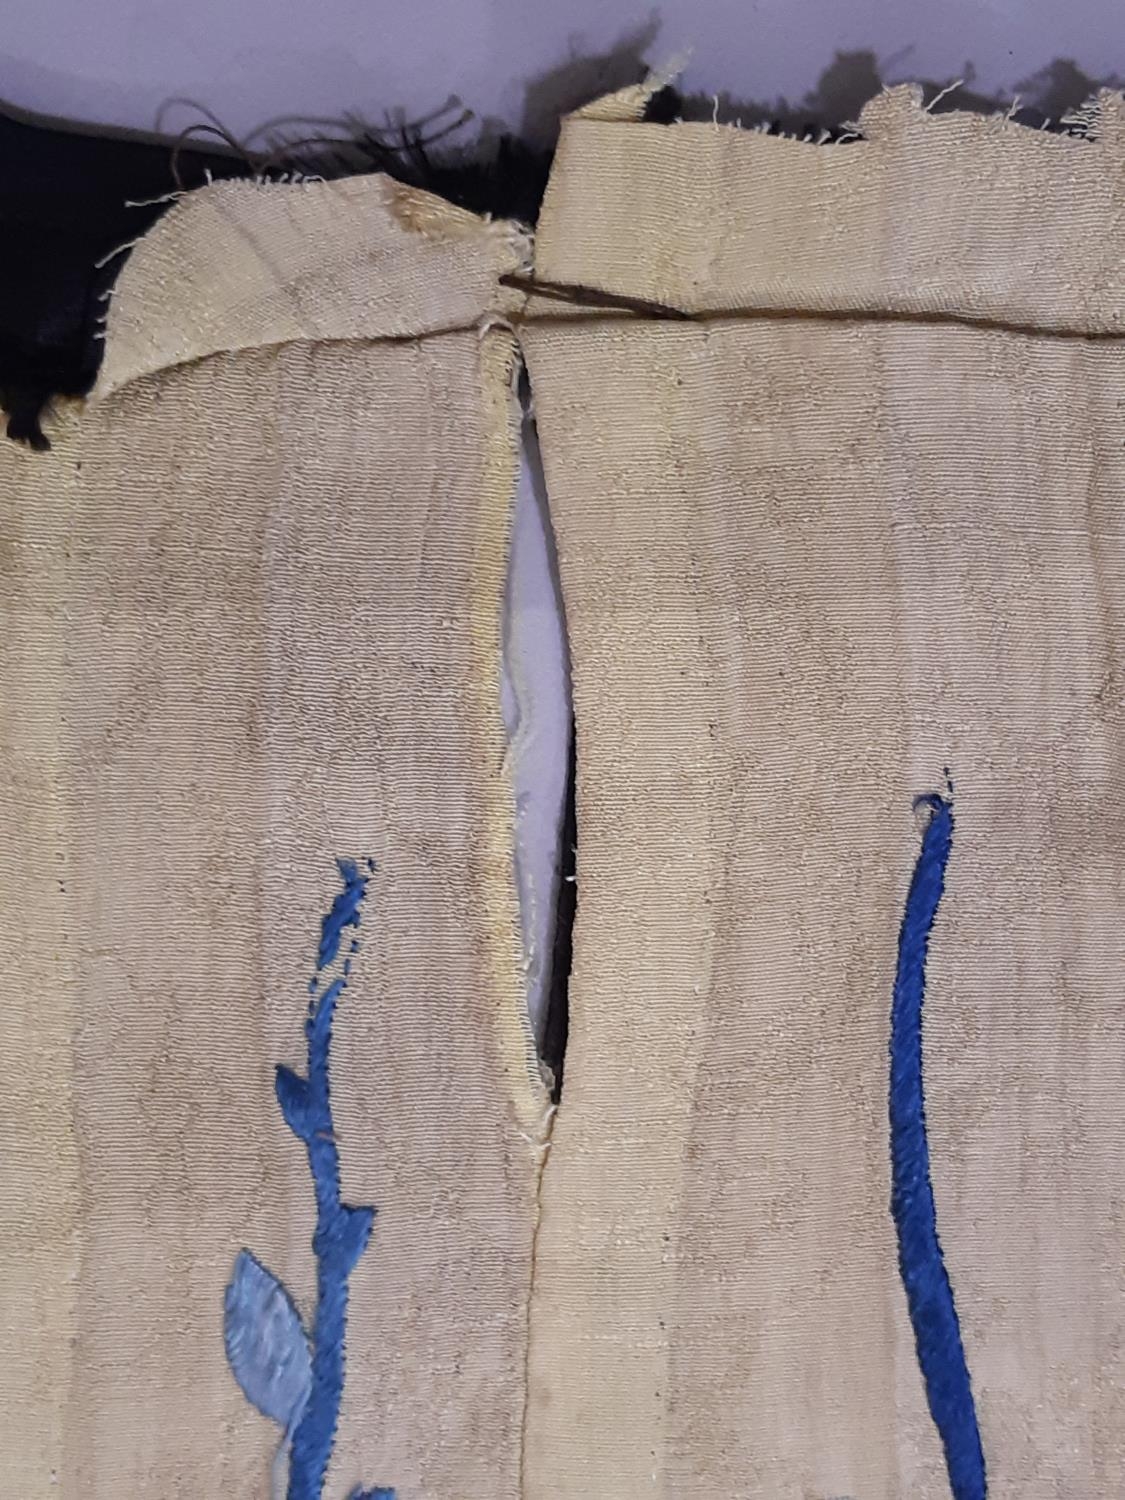 19th century Chinese lower section of skirt panel, with front sections heavily embroidered with - Image 10 of 11